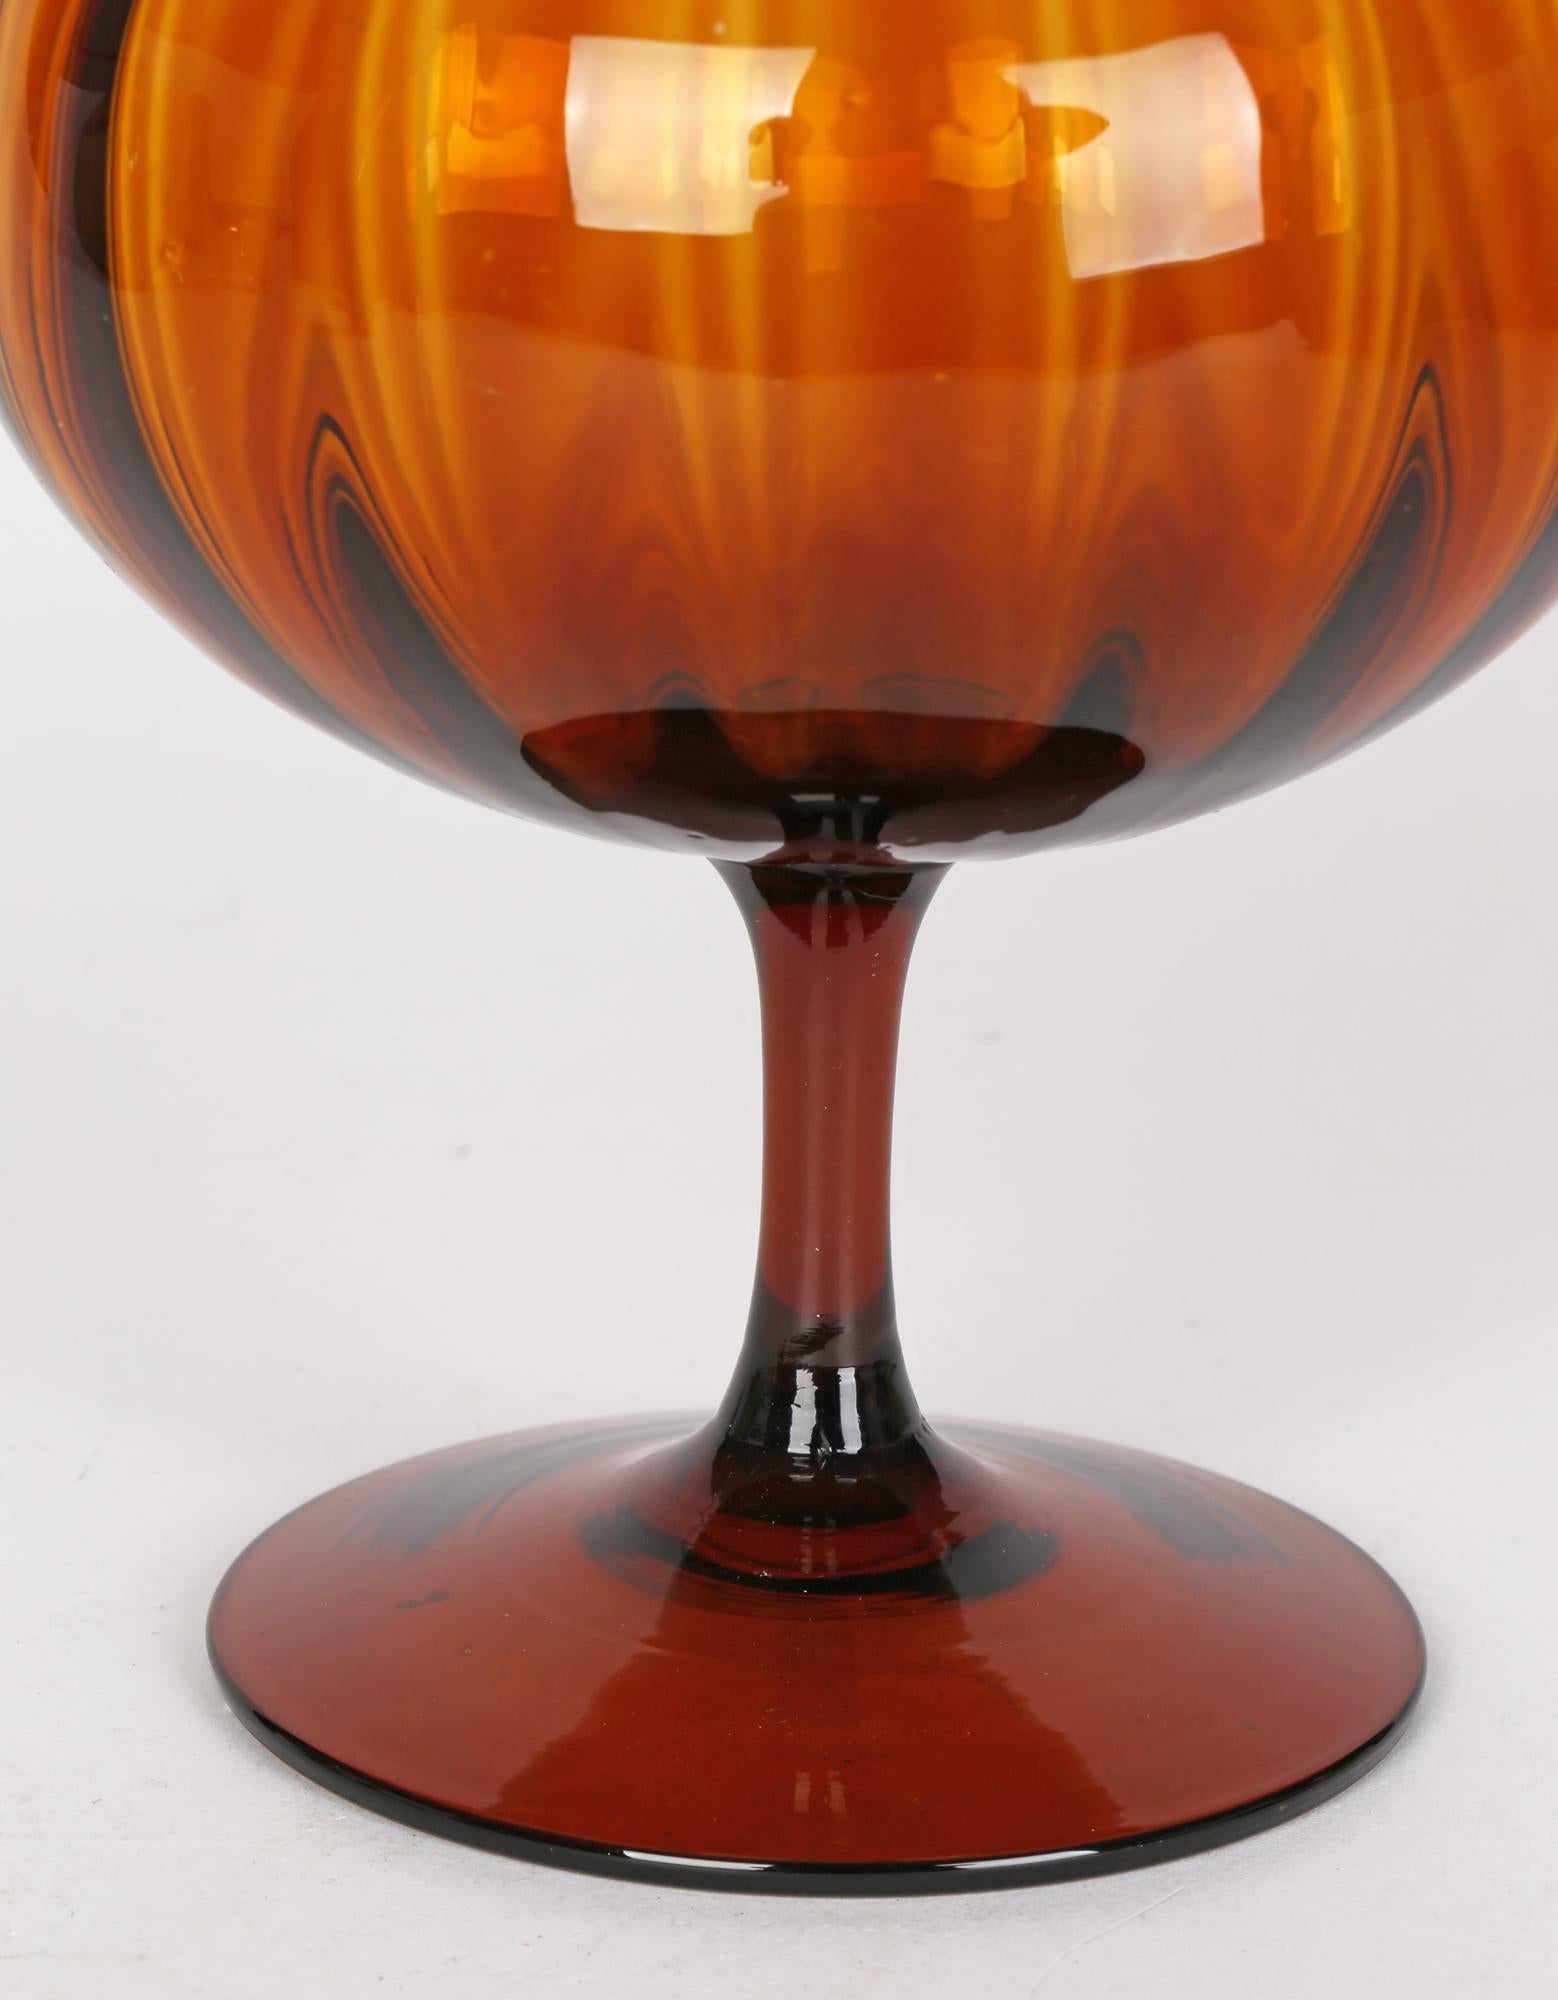 A stunning Italian mid-century hand-blown amber glass pedestal bowl by Empoli. This very stylish piece is beautifully made and stands on a slightly domed wide rounded foot with a narrow pedestal stem supporting a round bowl shaped top with a ribbed